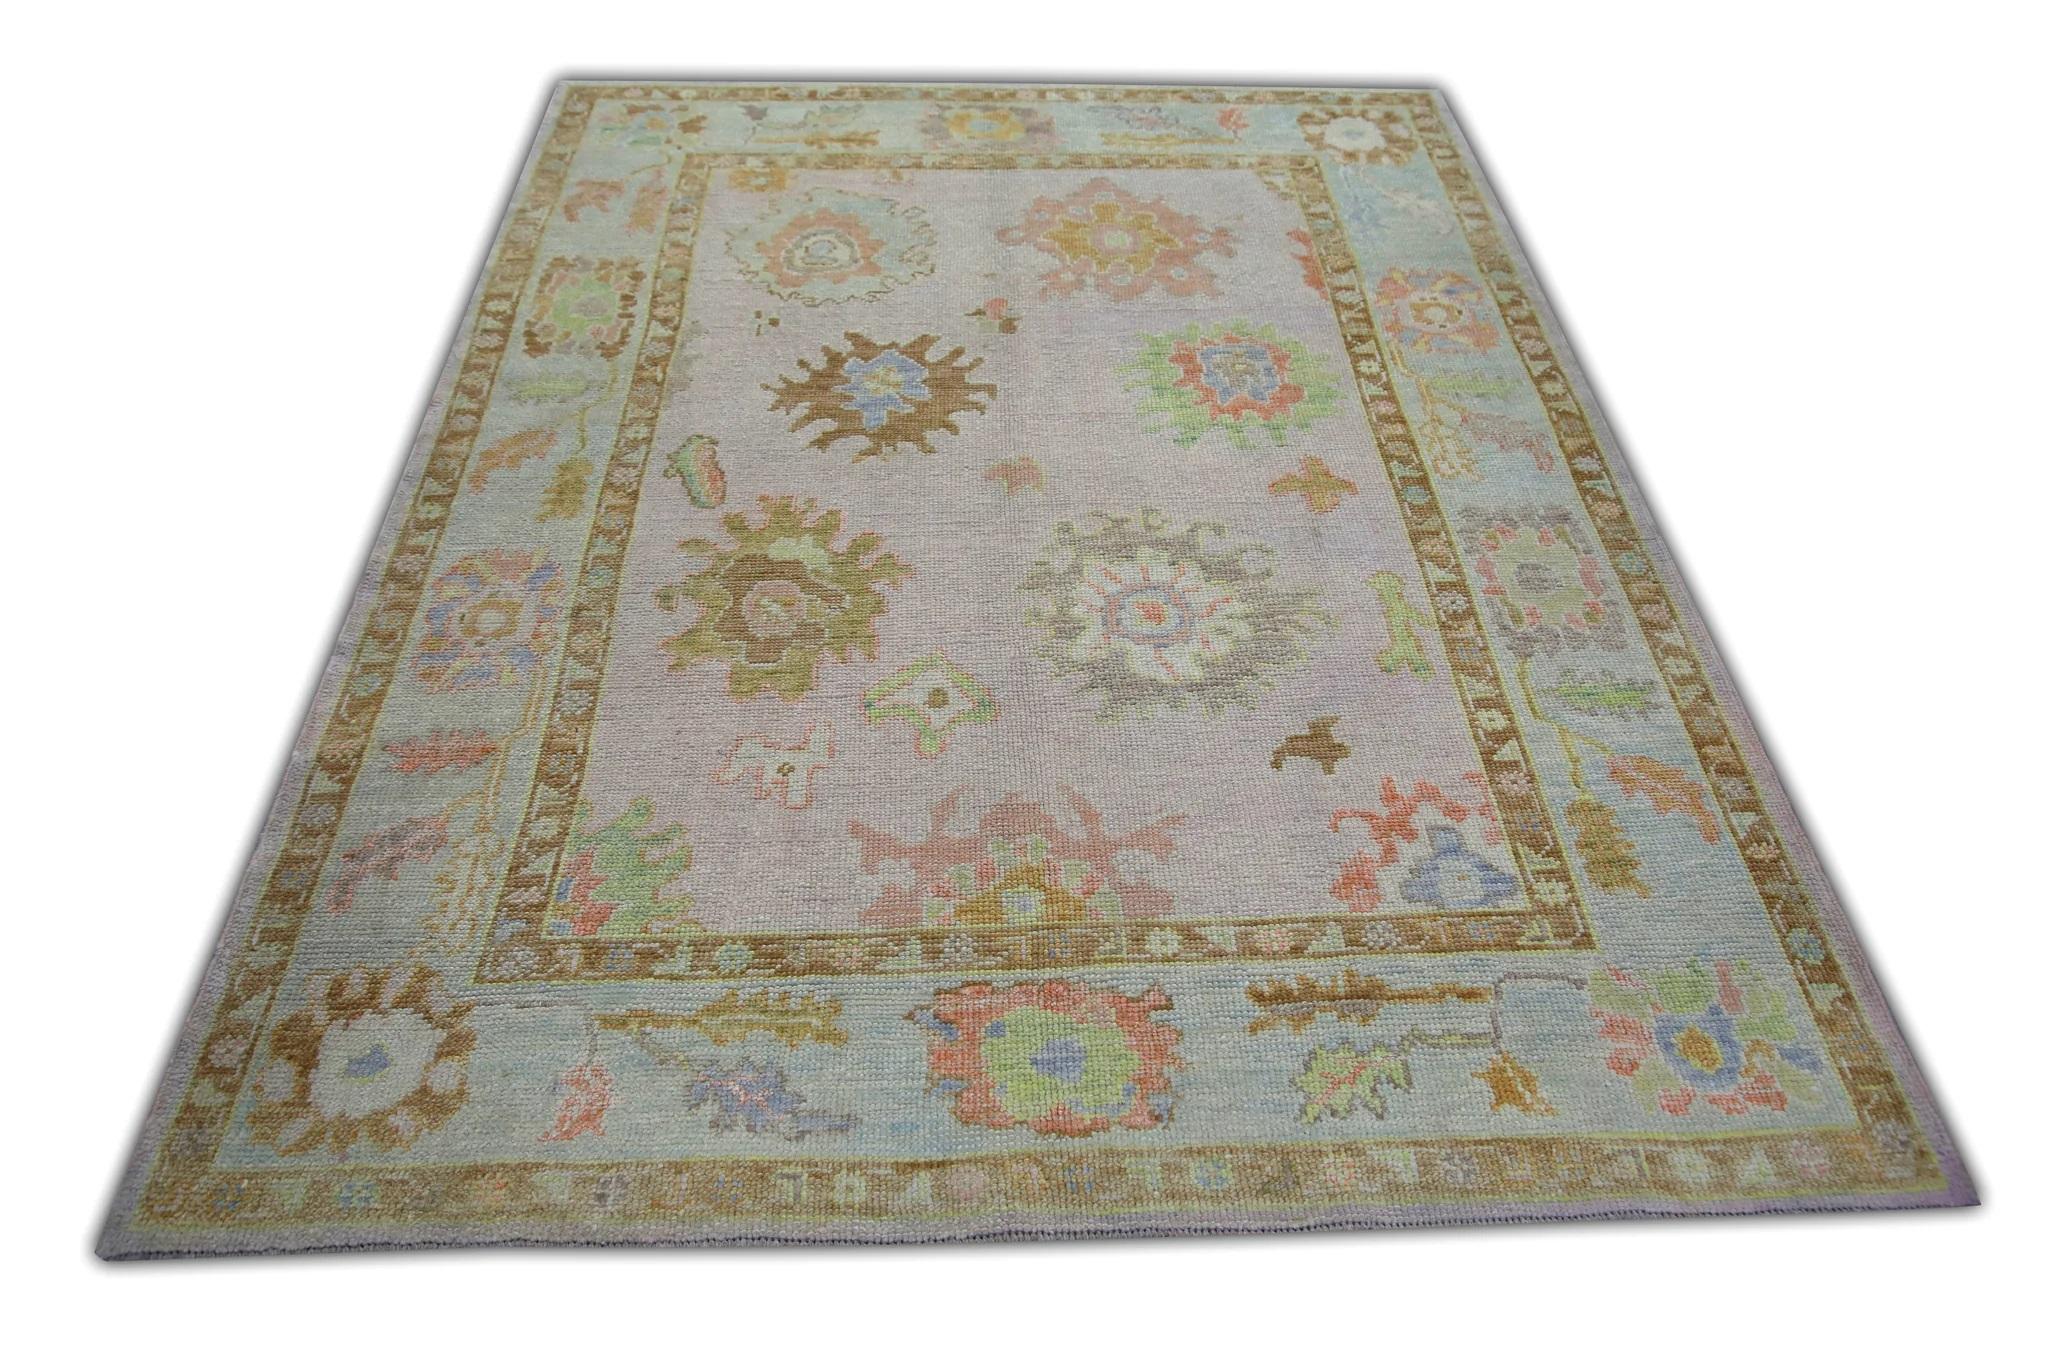 Contemporary Multicolor Floral Handwoven Wool Turkish Oushak Rug 5' x 6'8